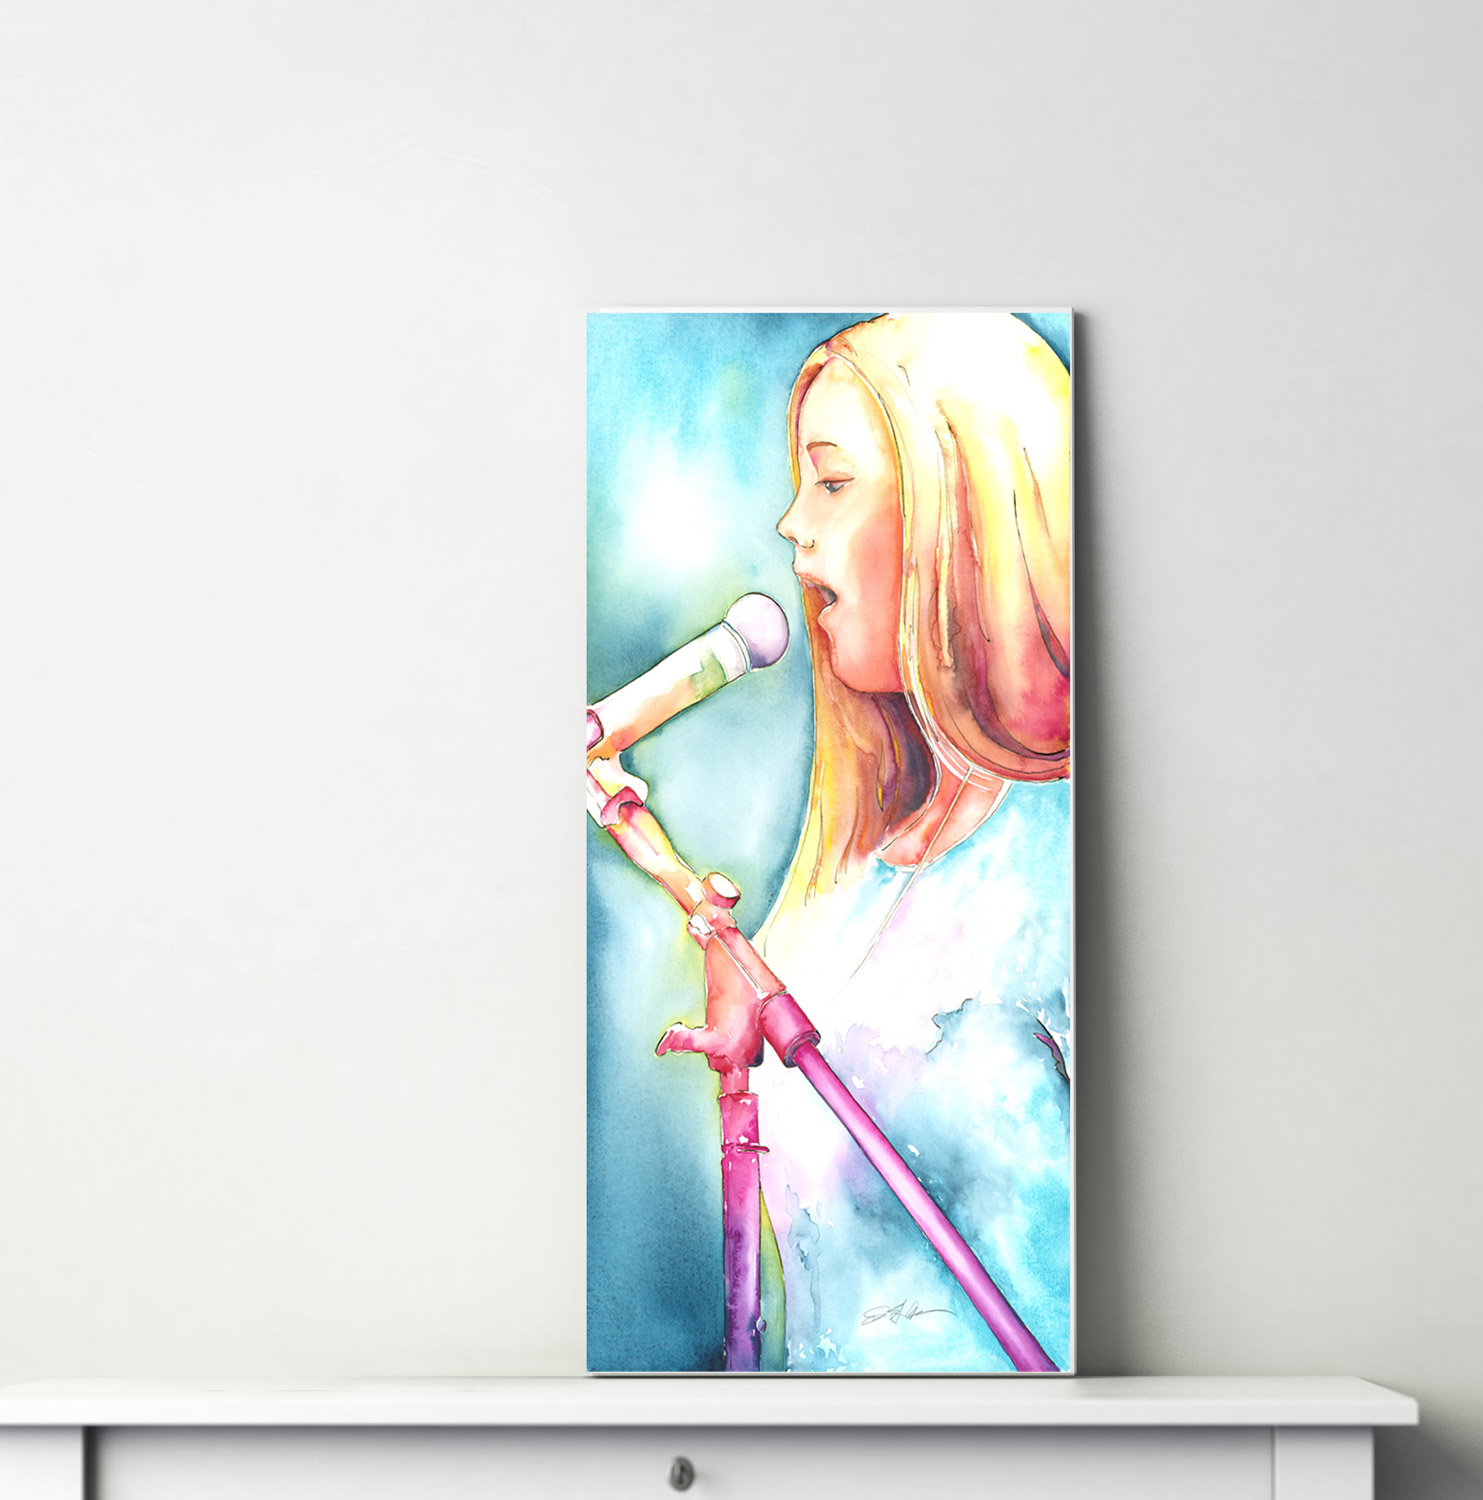 This is Shaina painting by Jamie Hansen, painting of a girl singing